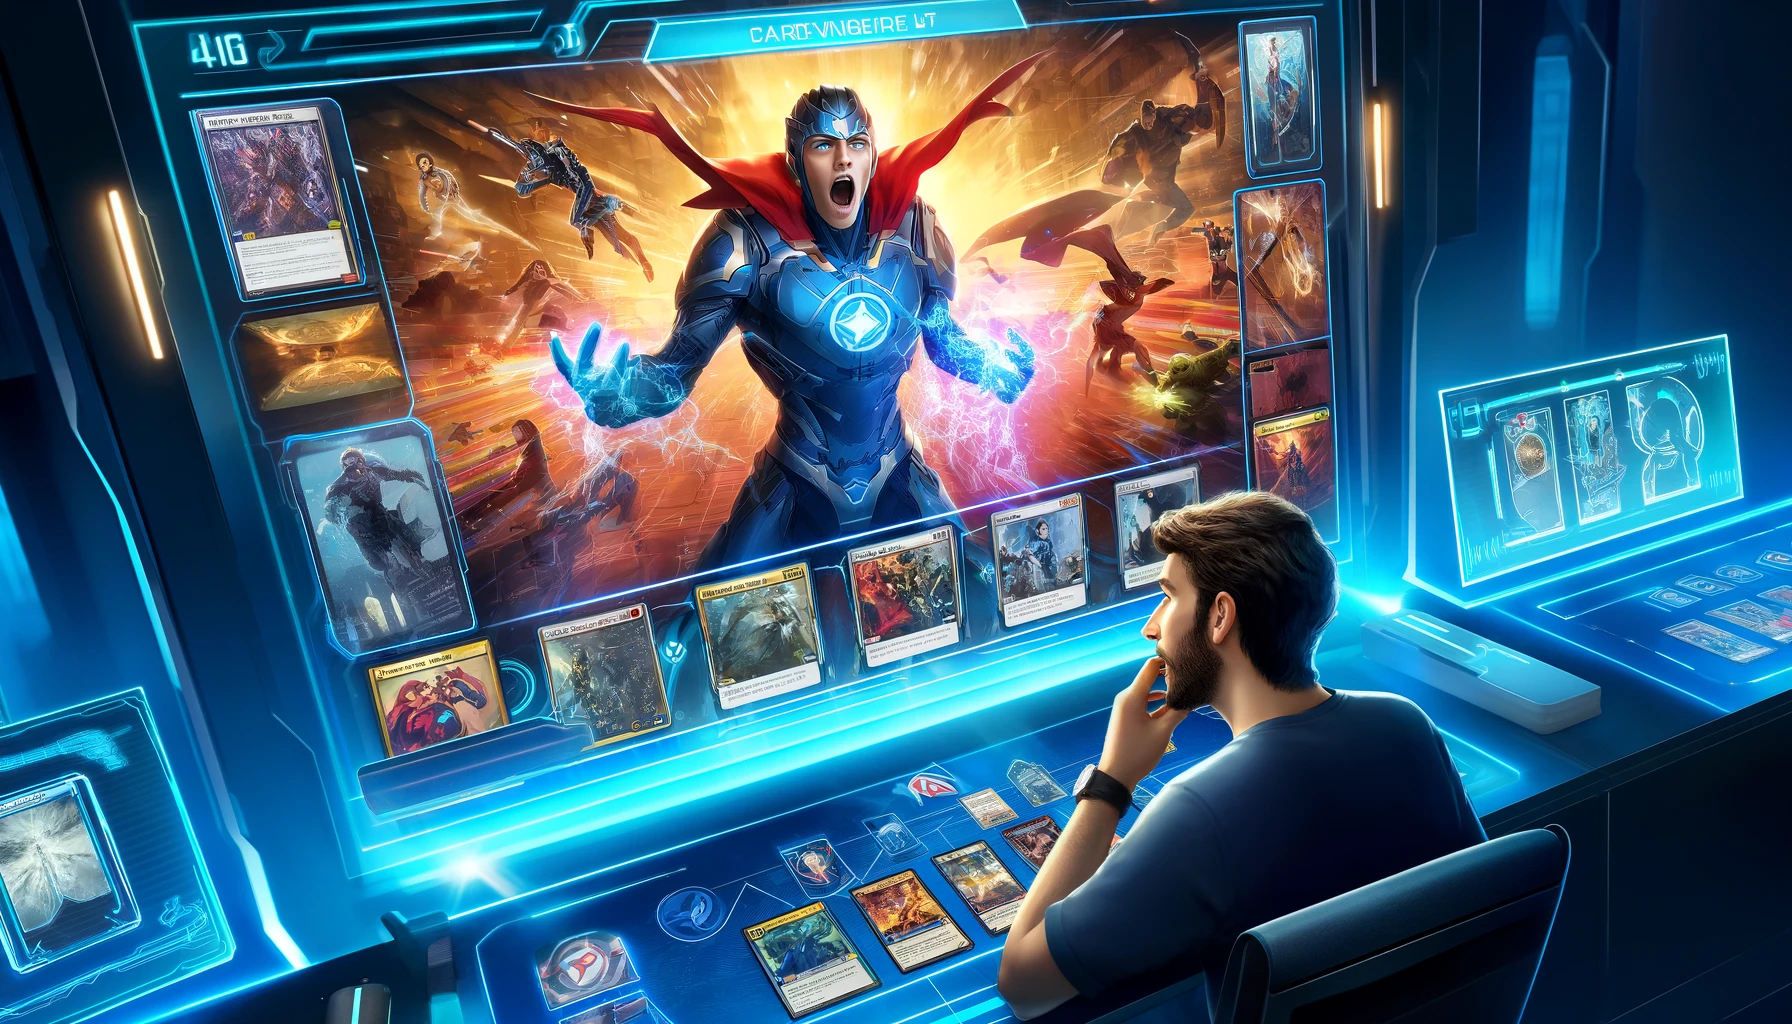 Capturing a high-tech card game battle between players in a futuristic gaming arena.